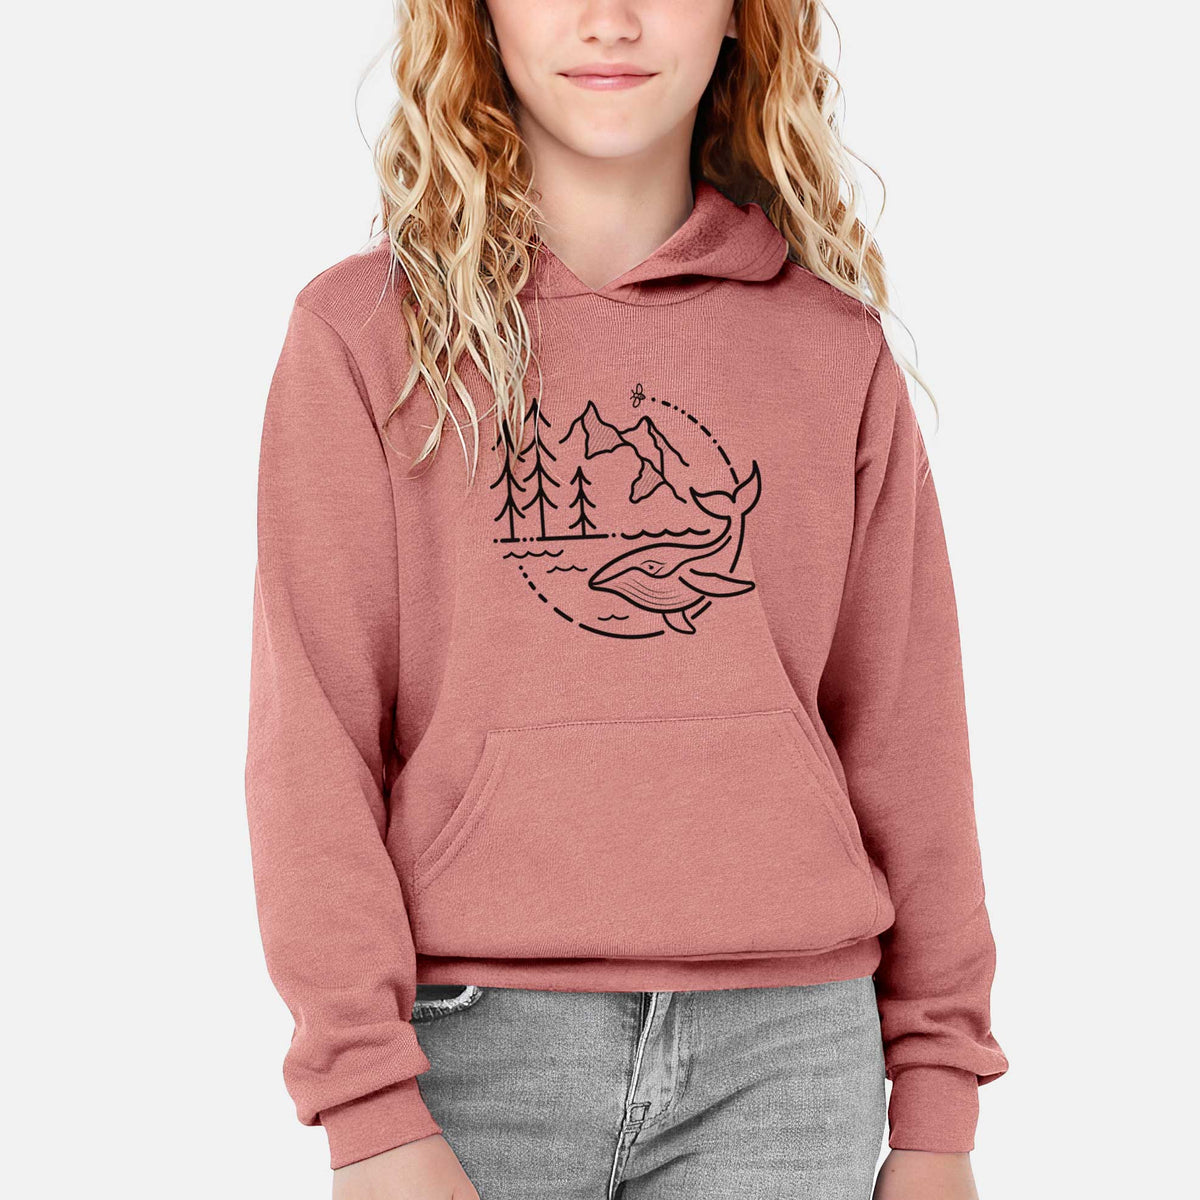 It&#39;s All Connected - Youth Hoodie Sweatshirt